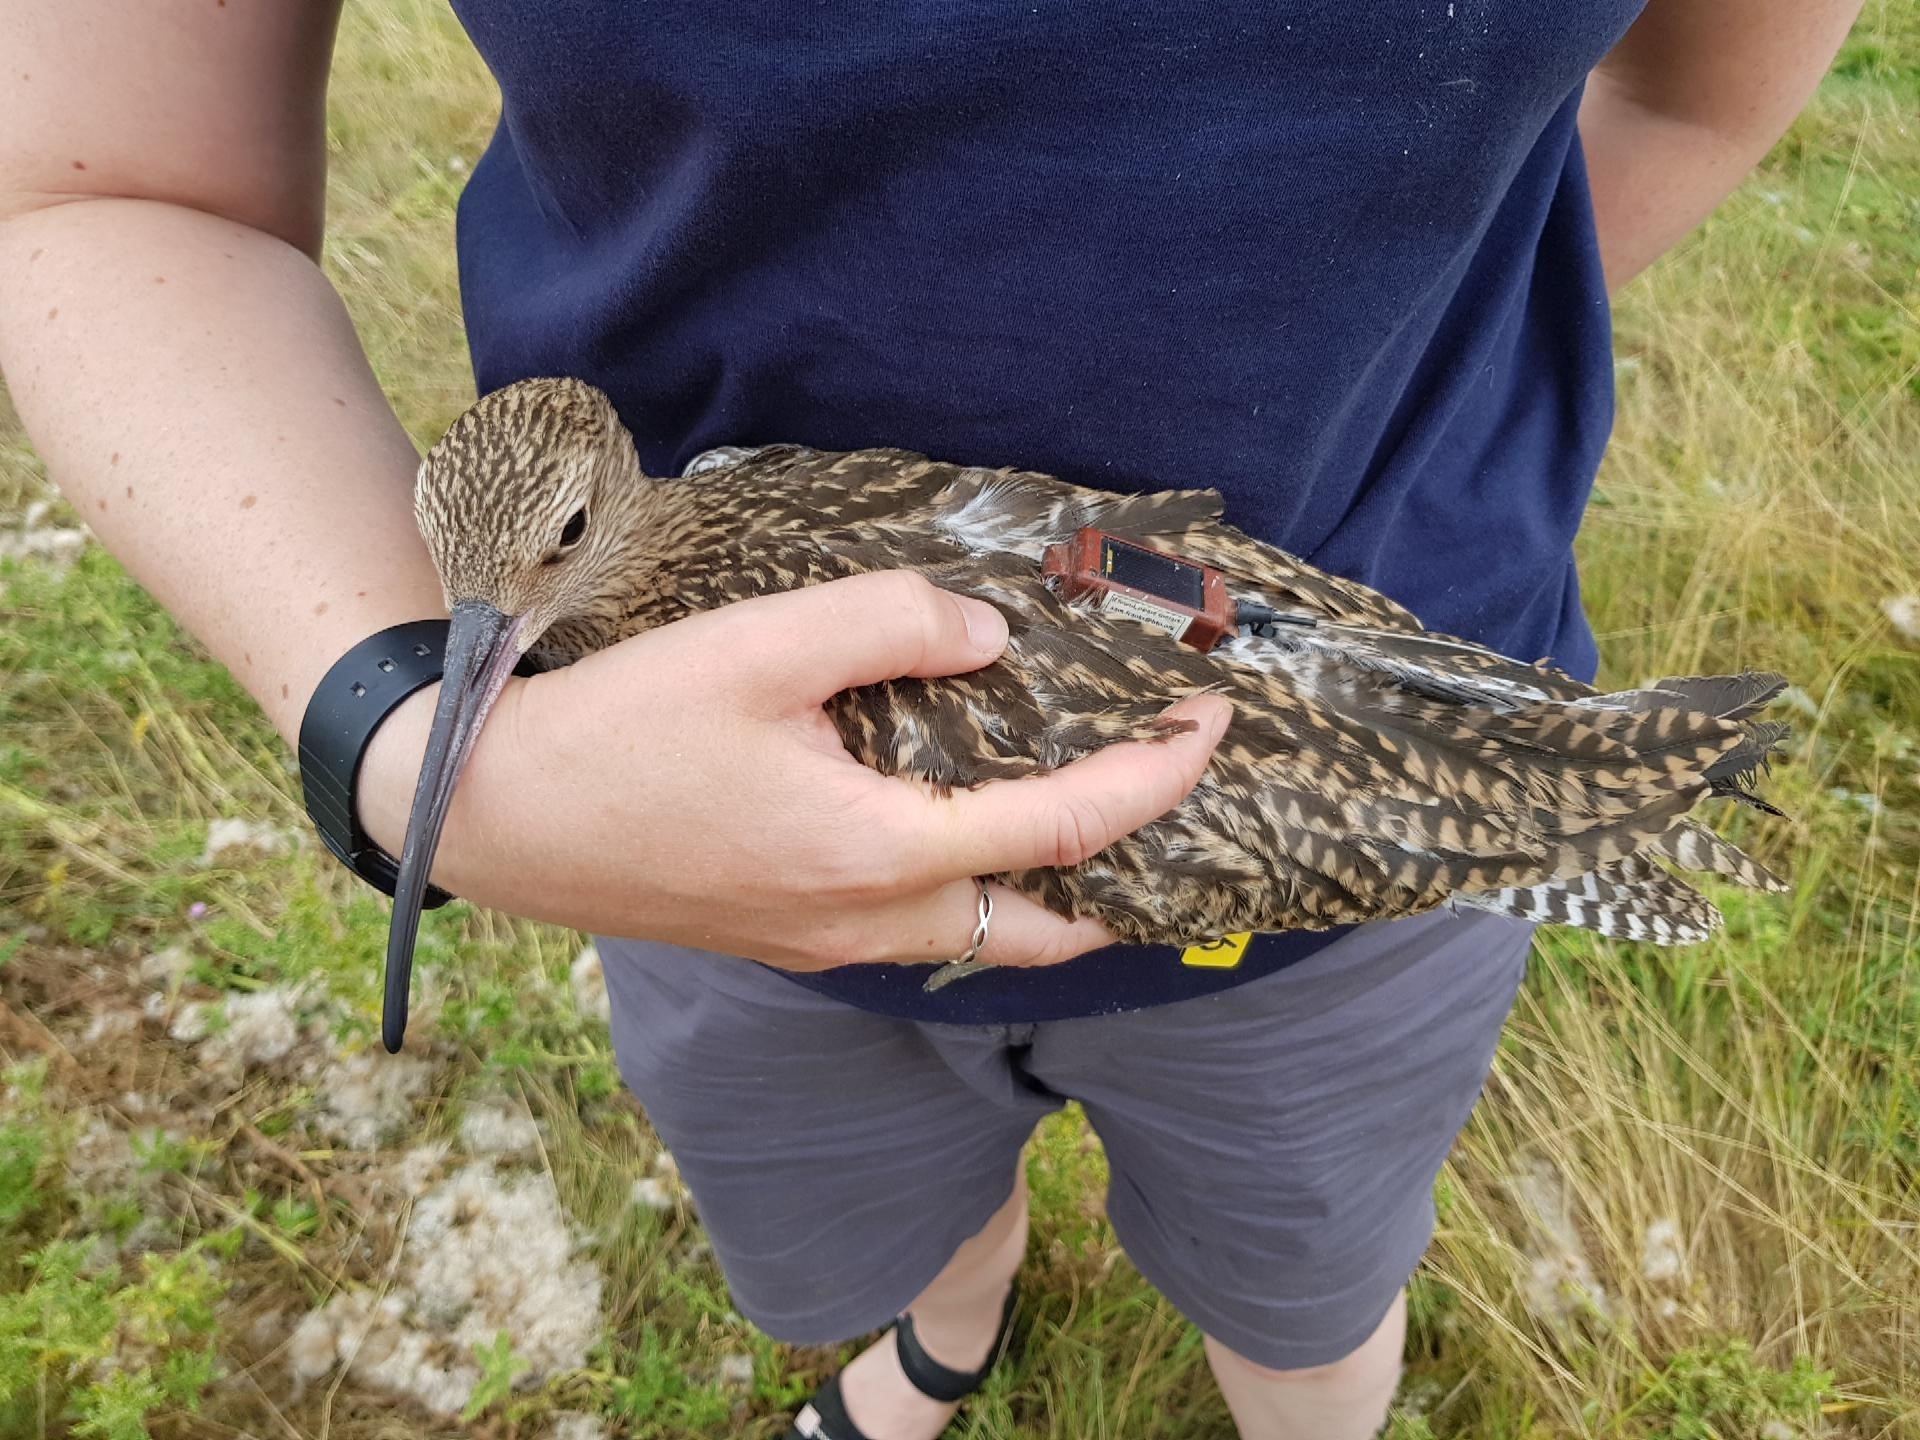 Image shows a civilian holding a Eurasian Curlew, a small brown bird with a distinctively long beak thin beak, with a GPS tracking tag on its back.